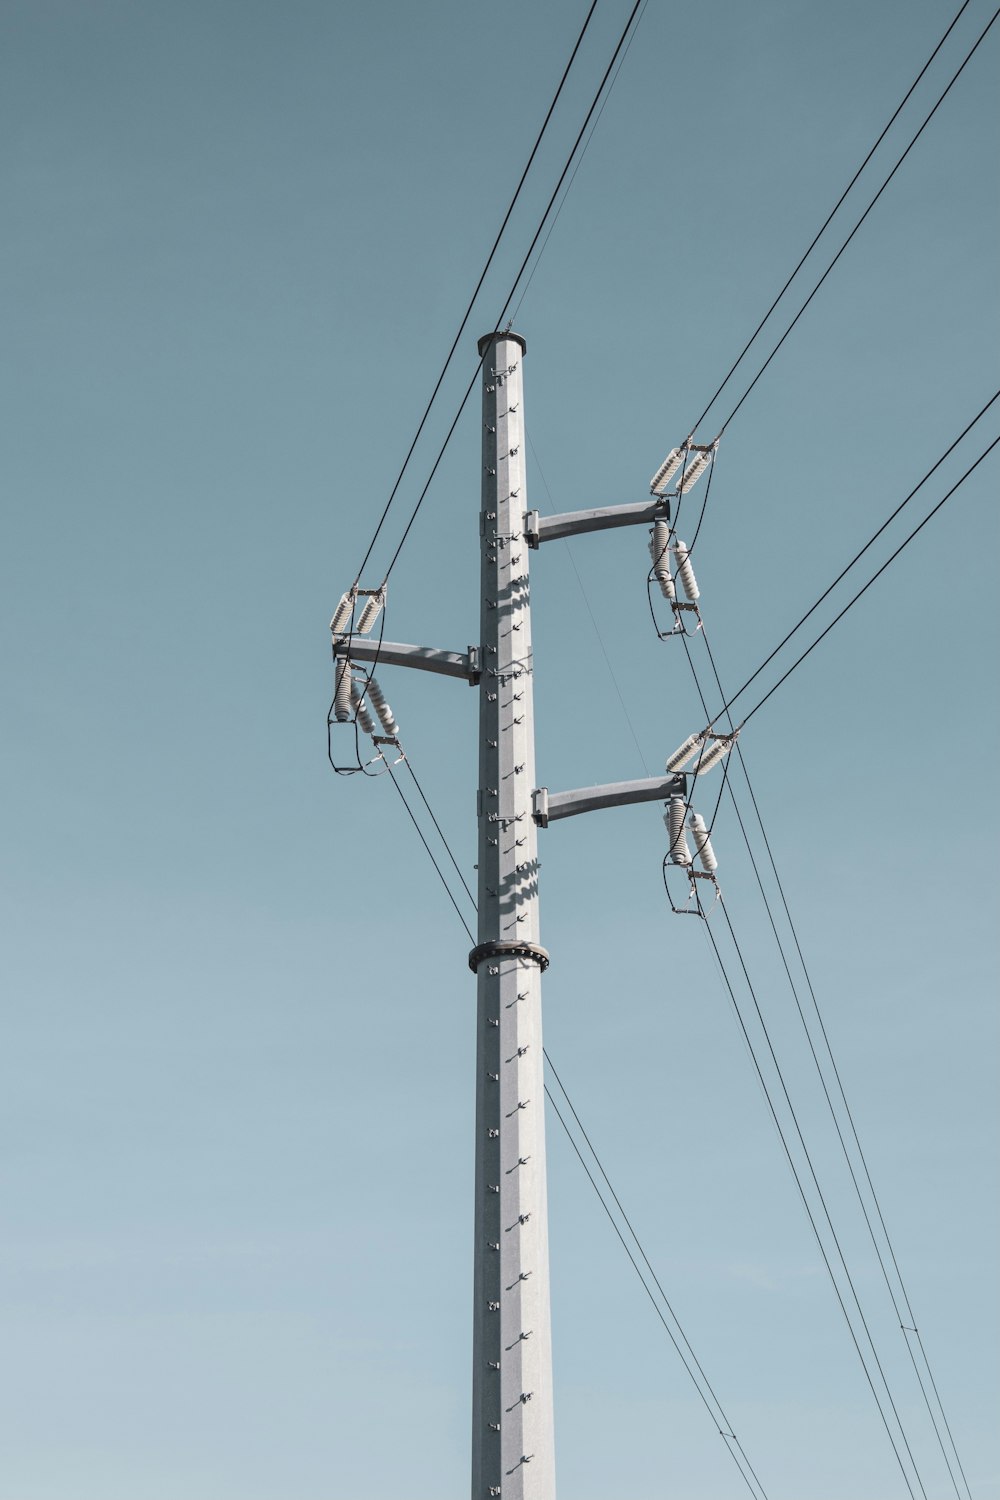 a pole with a bunch of wires attached to it